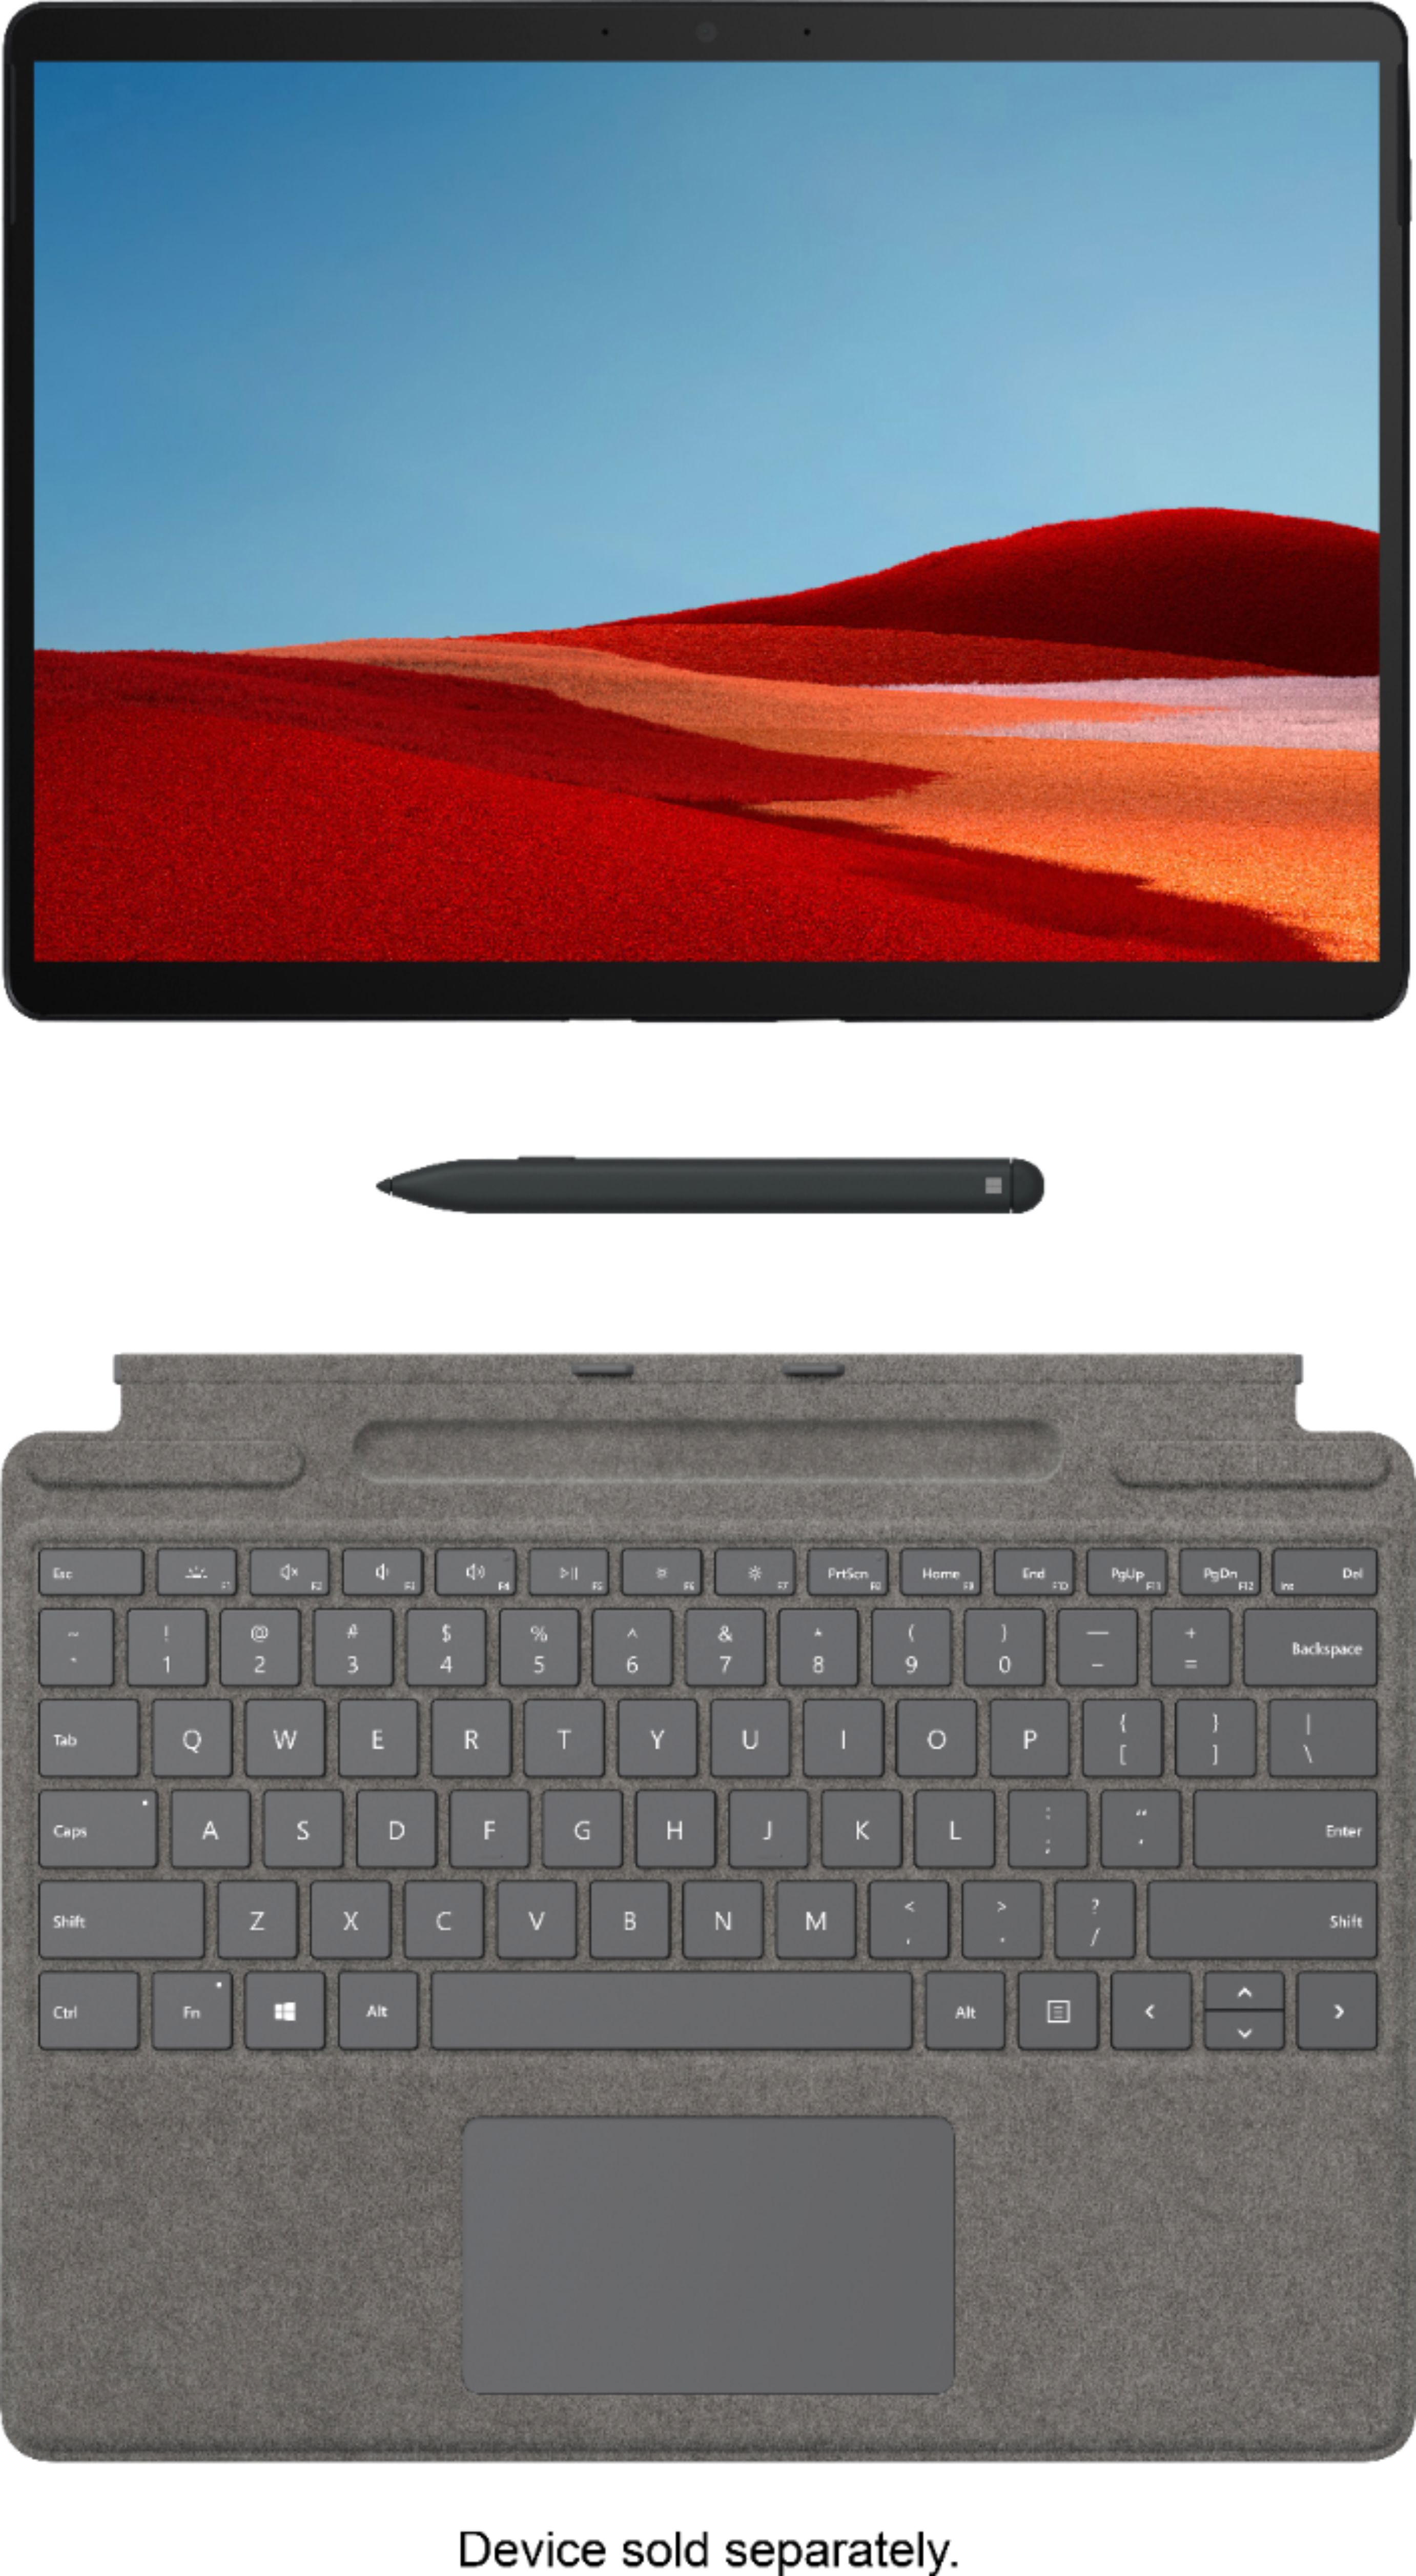 Questions And Answers Microsoft Surface Pro X Signature Keyboard With